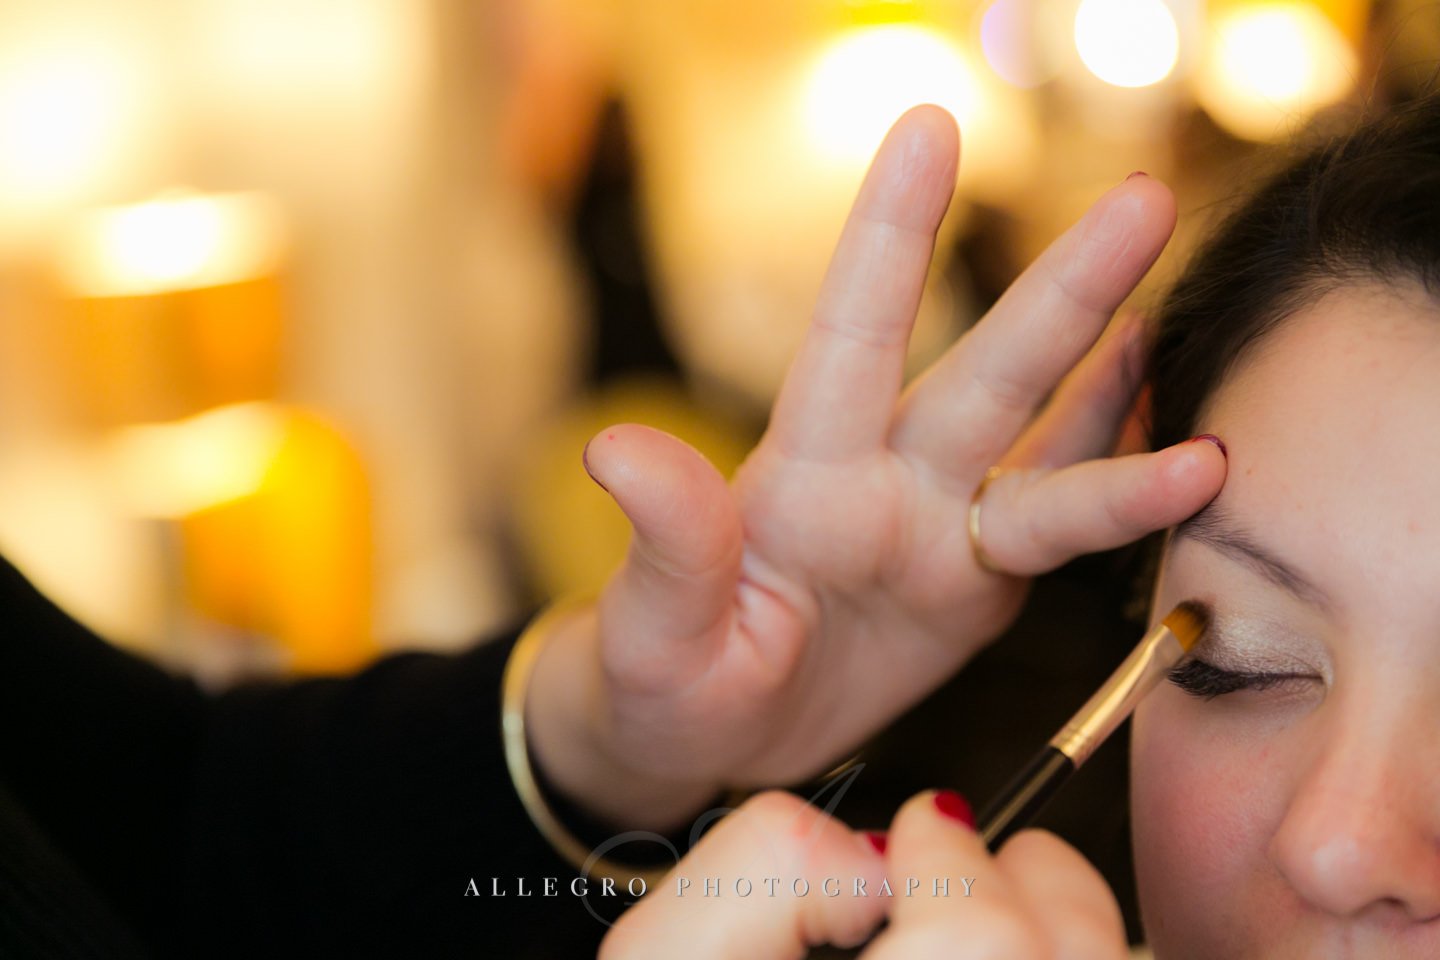 make-up application for bride -photo by allegro photography